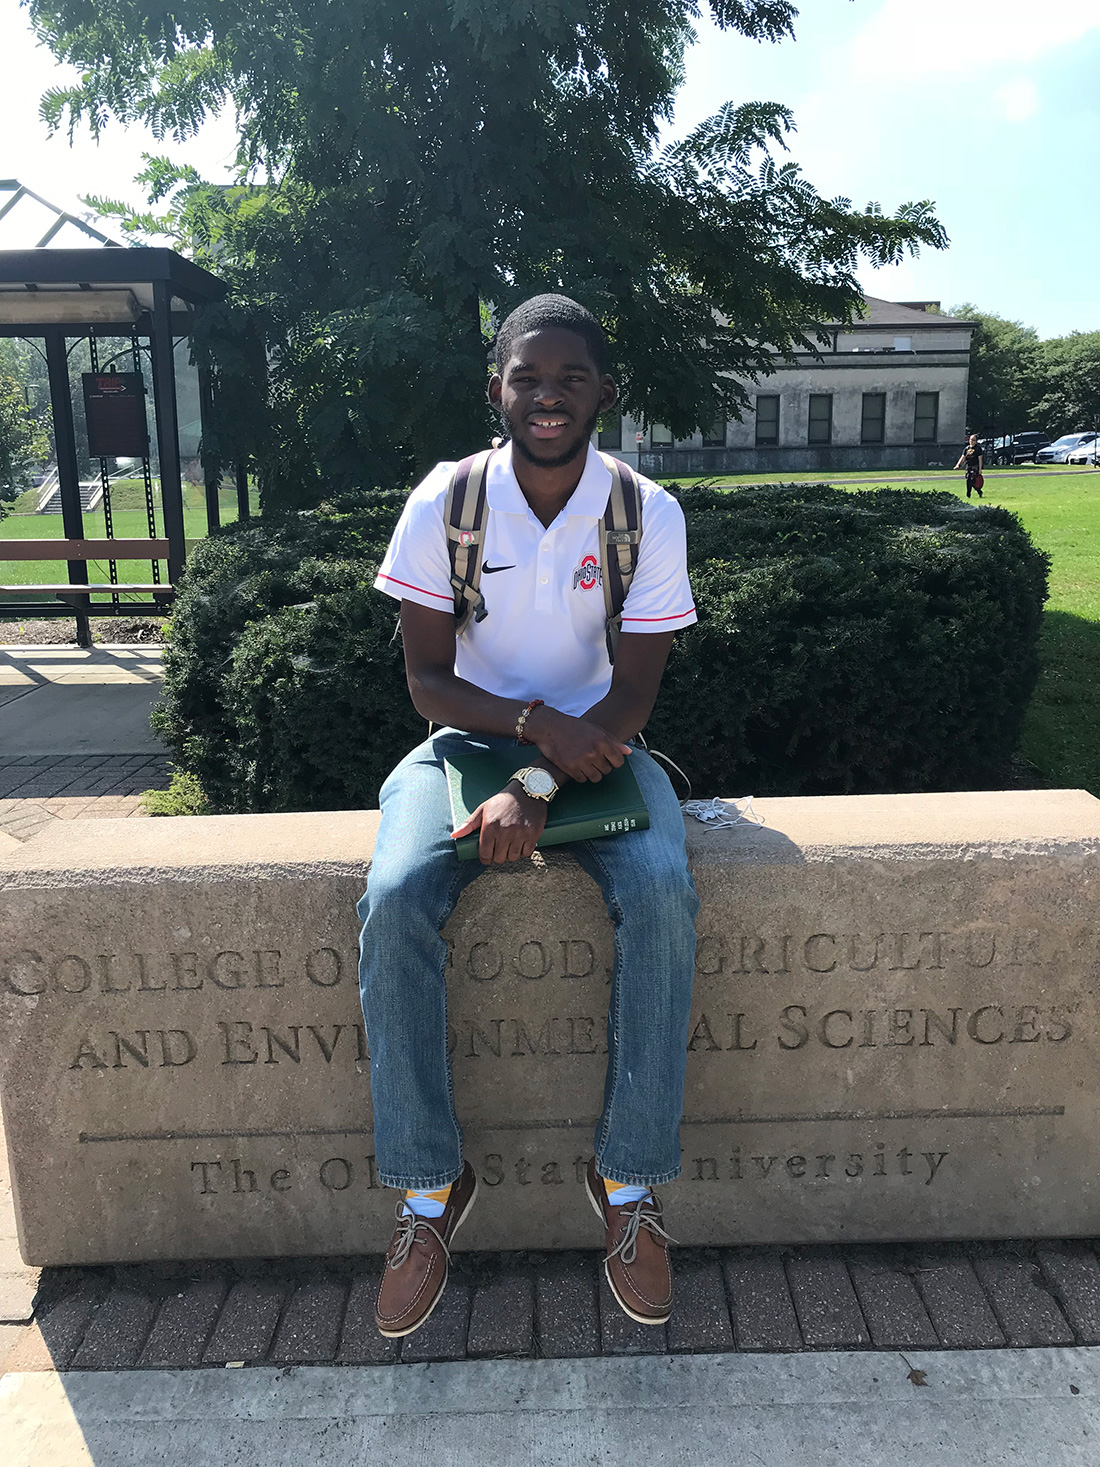 Joshua Simon is a master’s student studying environmental social science at the School of Environment and Natural Resources at Ohio State University